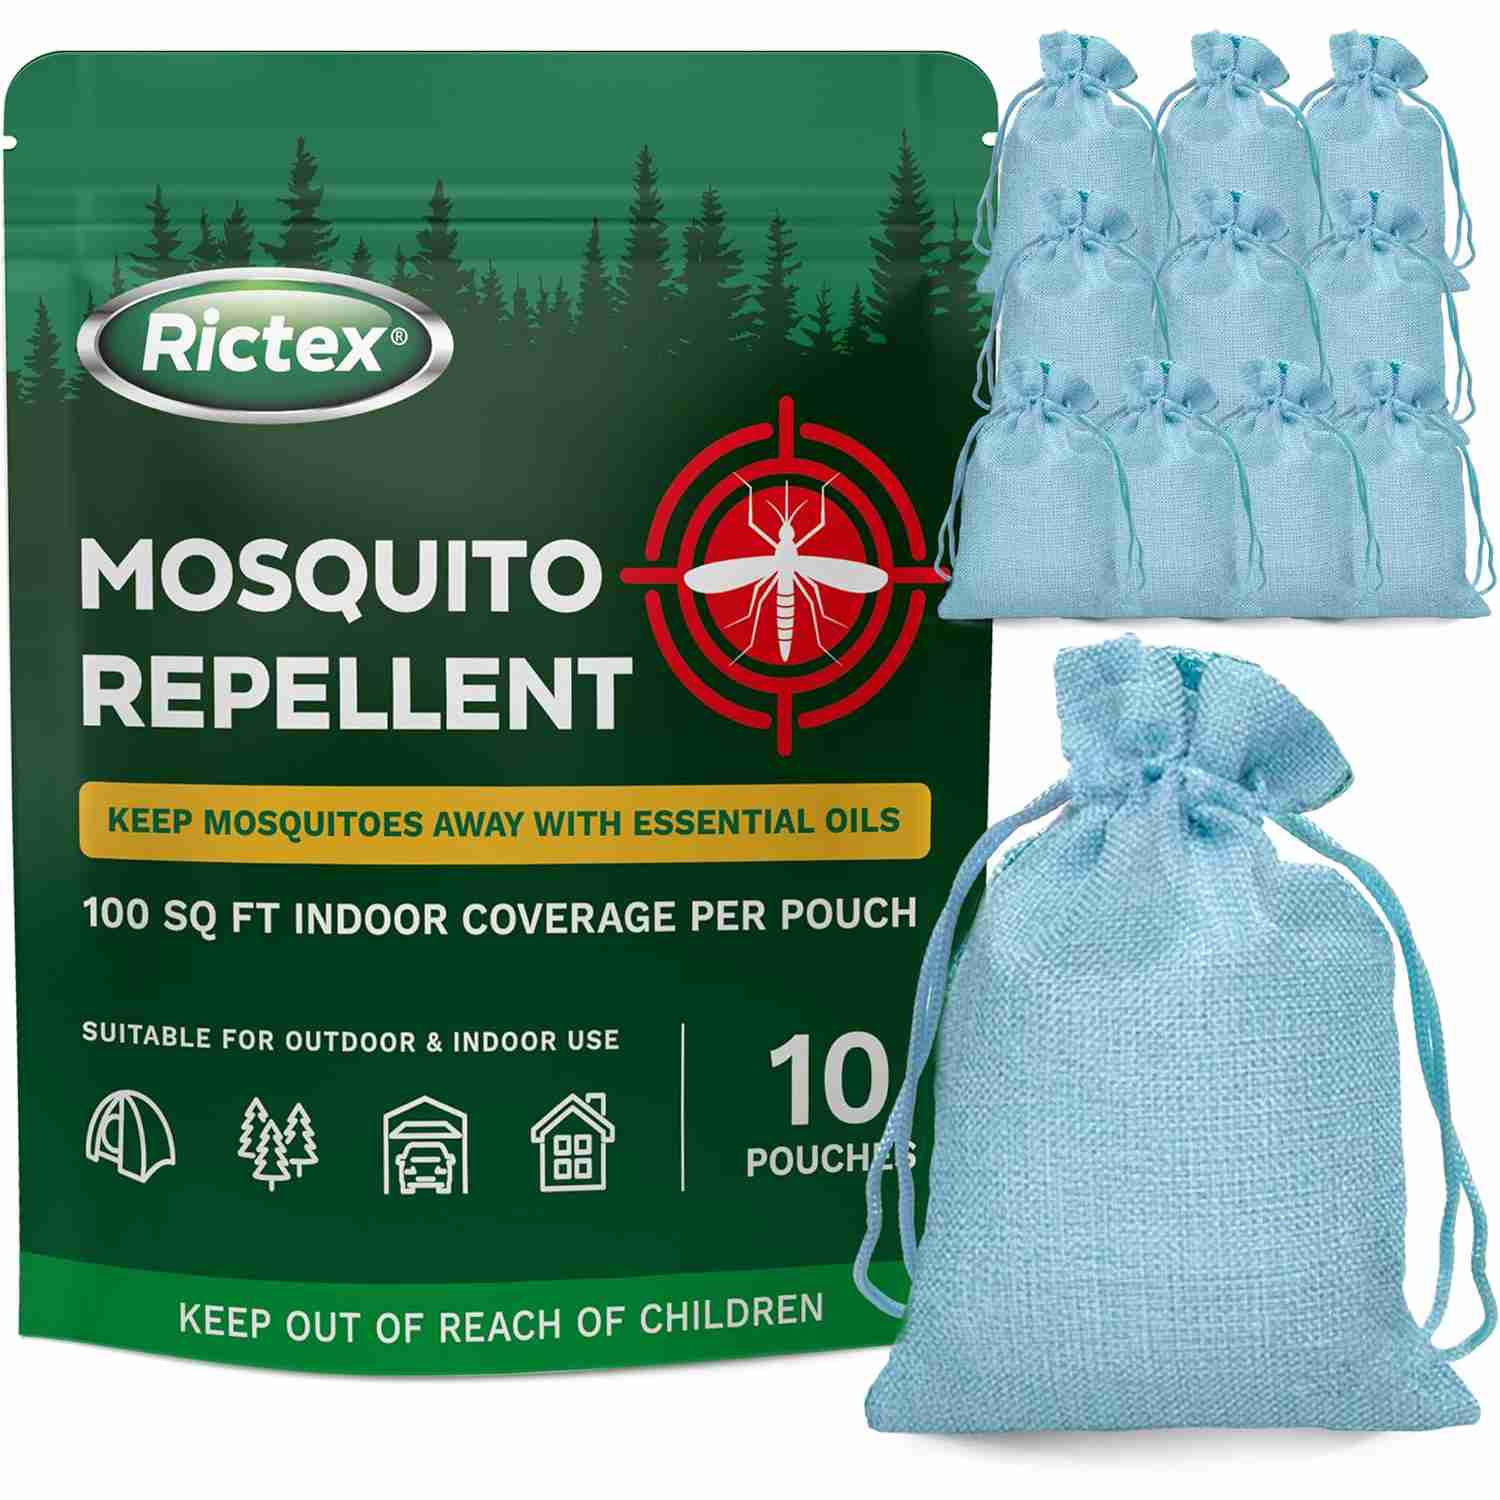 travel-mosquito-repellent with cash back rebate